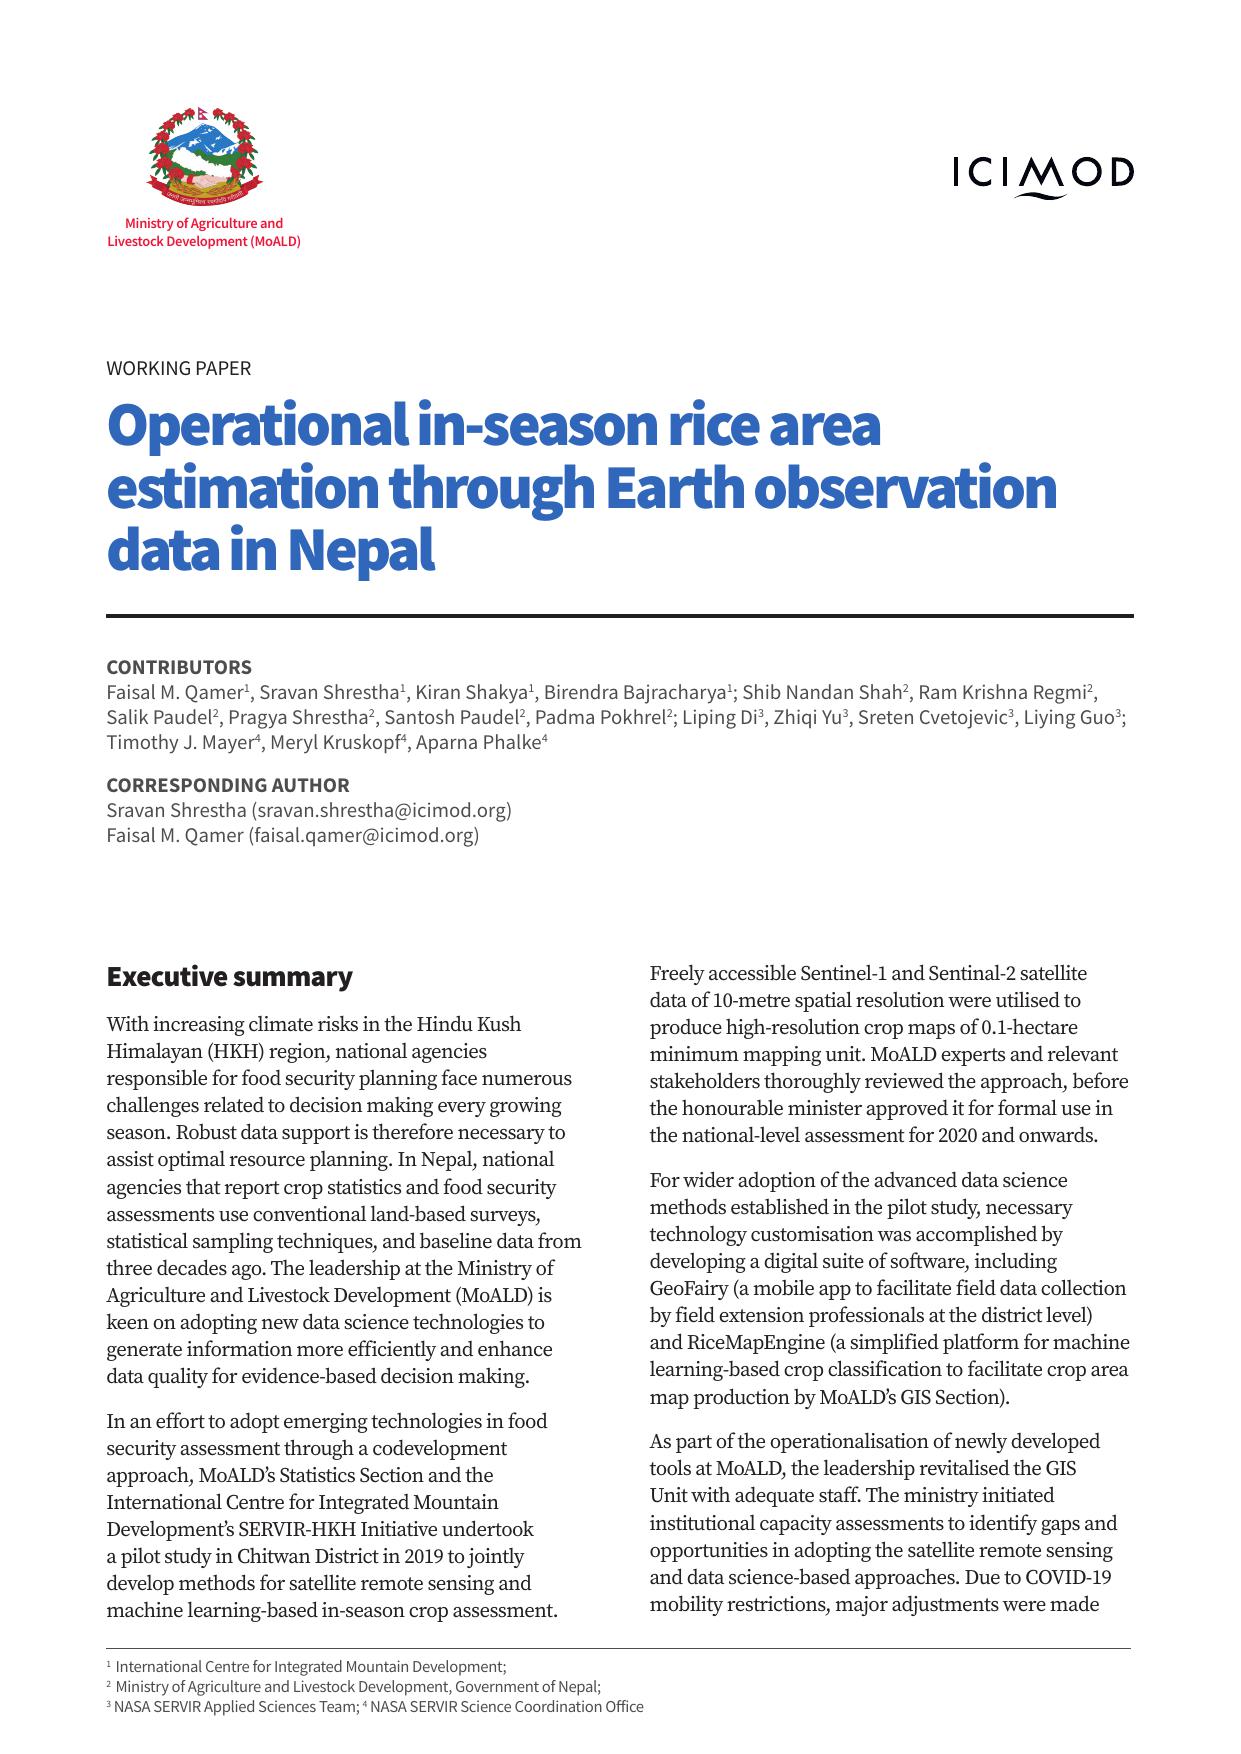 Operational in-season rice area estimation through Earth observation data in Nepal - working paper